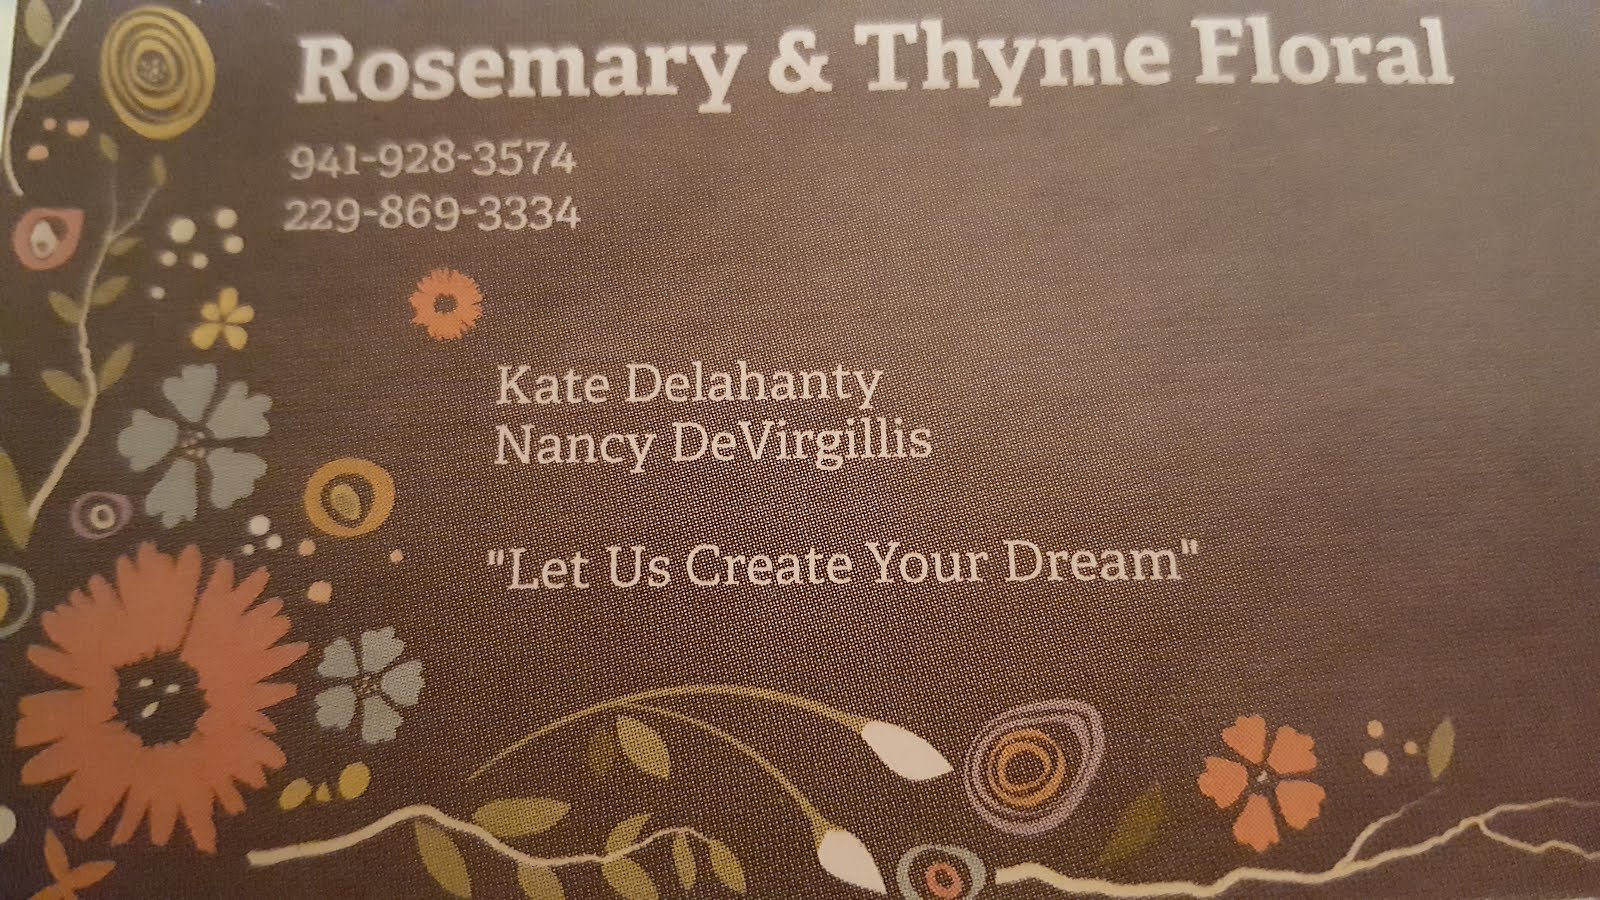 "Let Us Create Your Dream"